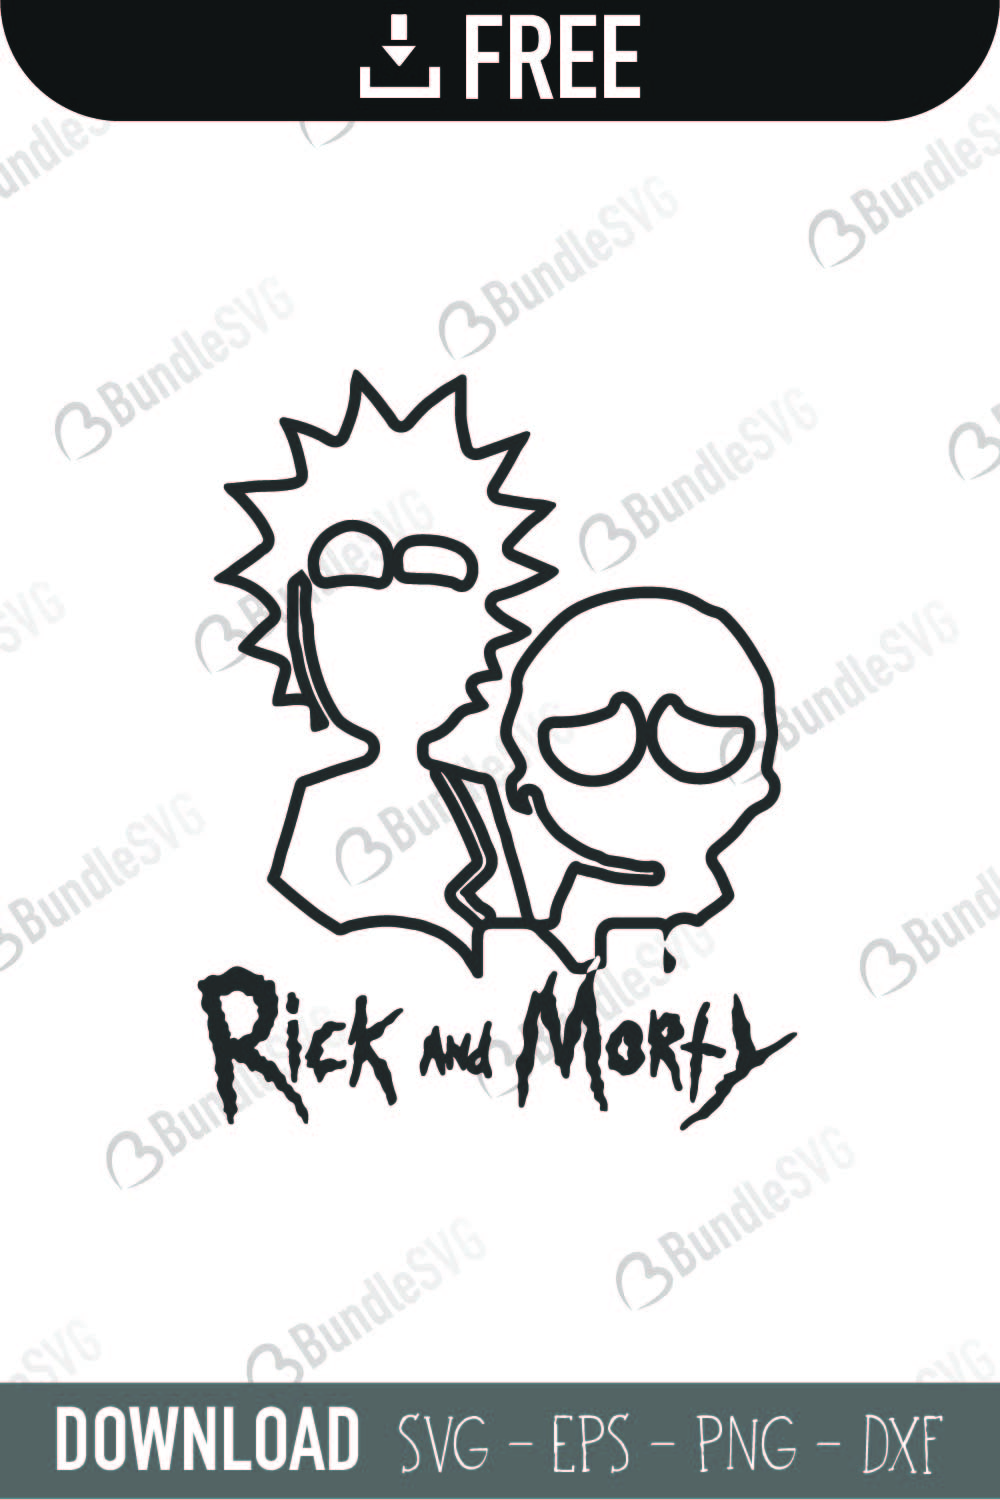 Free Rick And Morty SVG For Cricut